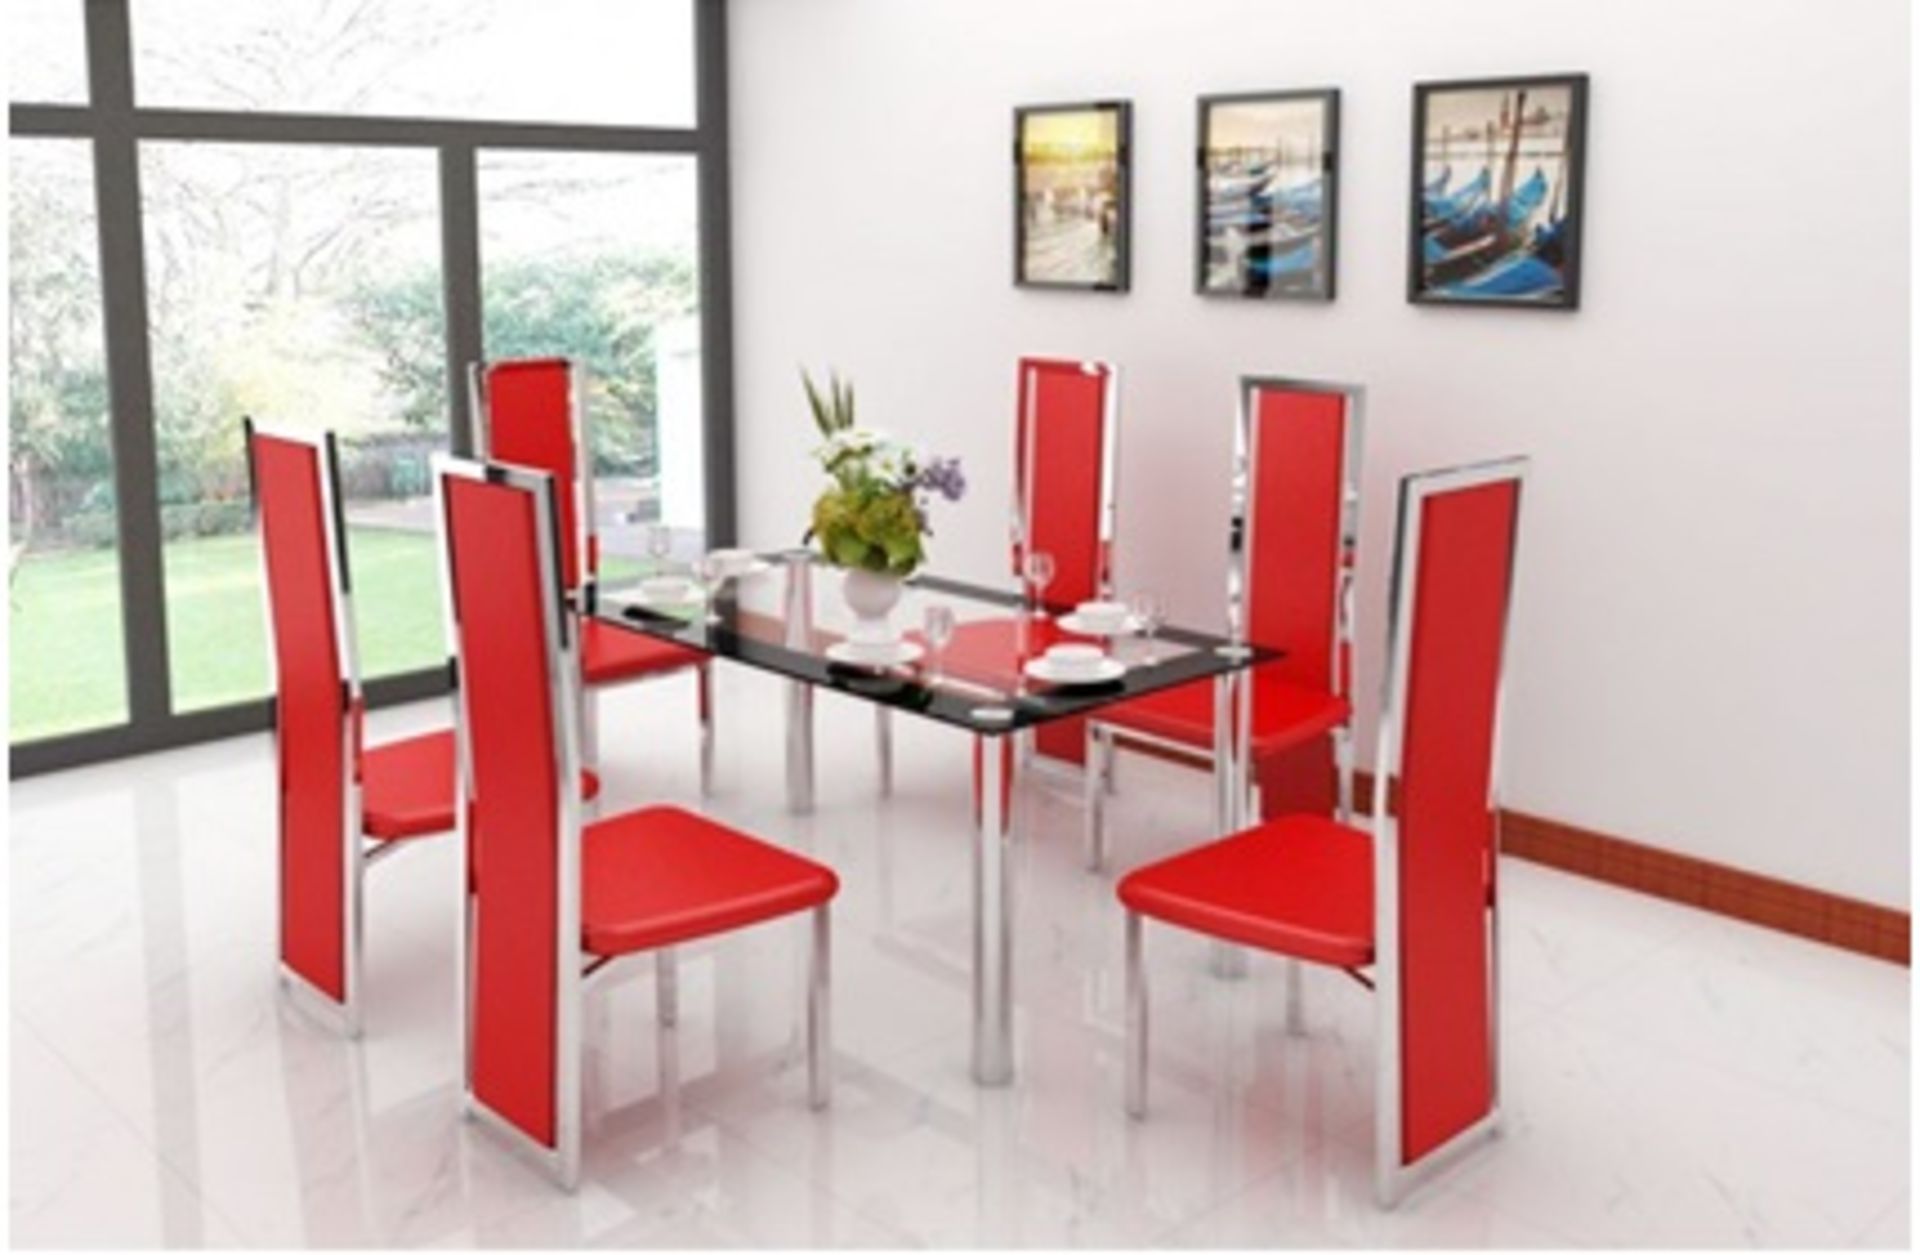 1 x Chrome and Glass 4 Seater Dining Table and 4 Red Chairs - DTBL013 (Brand New & Boxed)